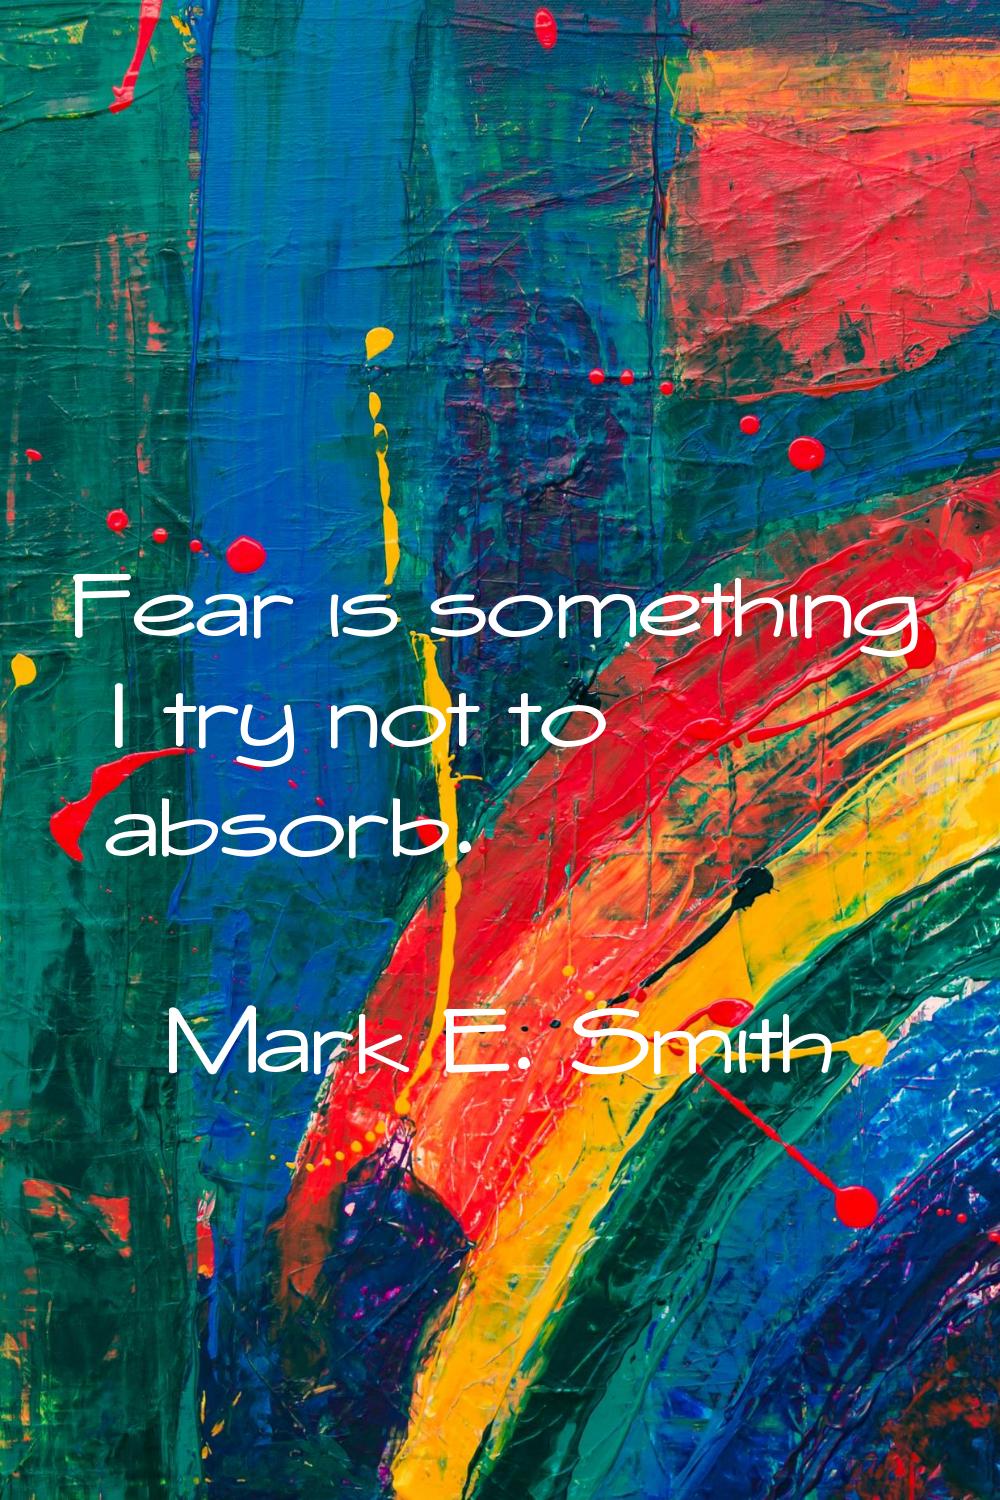 Fear is something I try not to absorb.